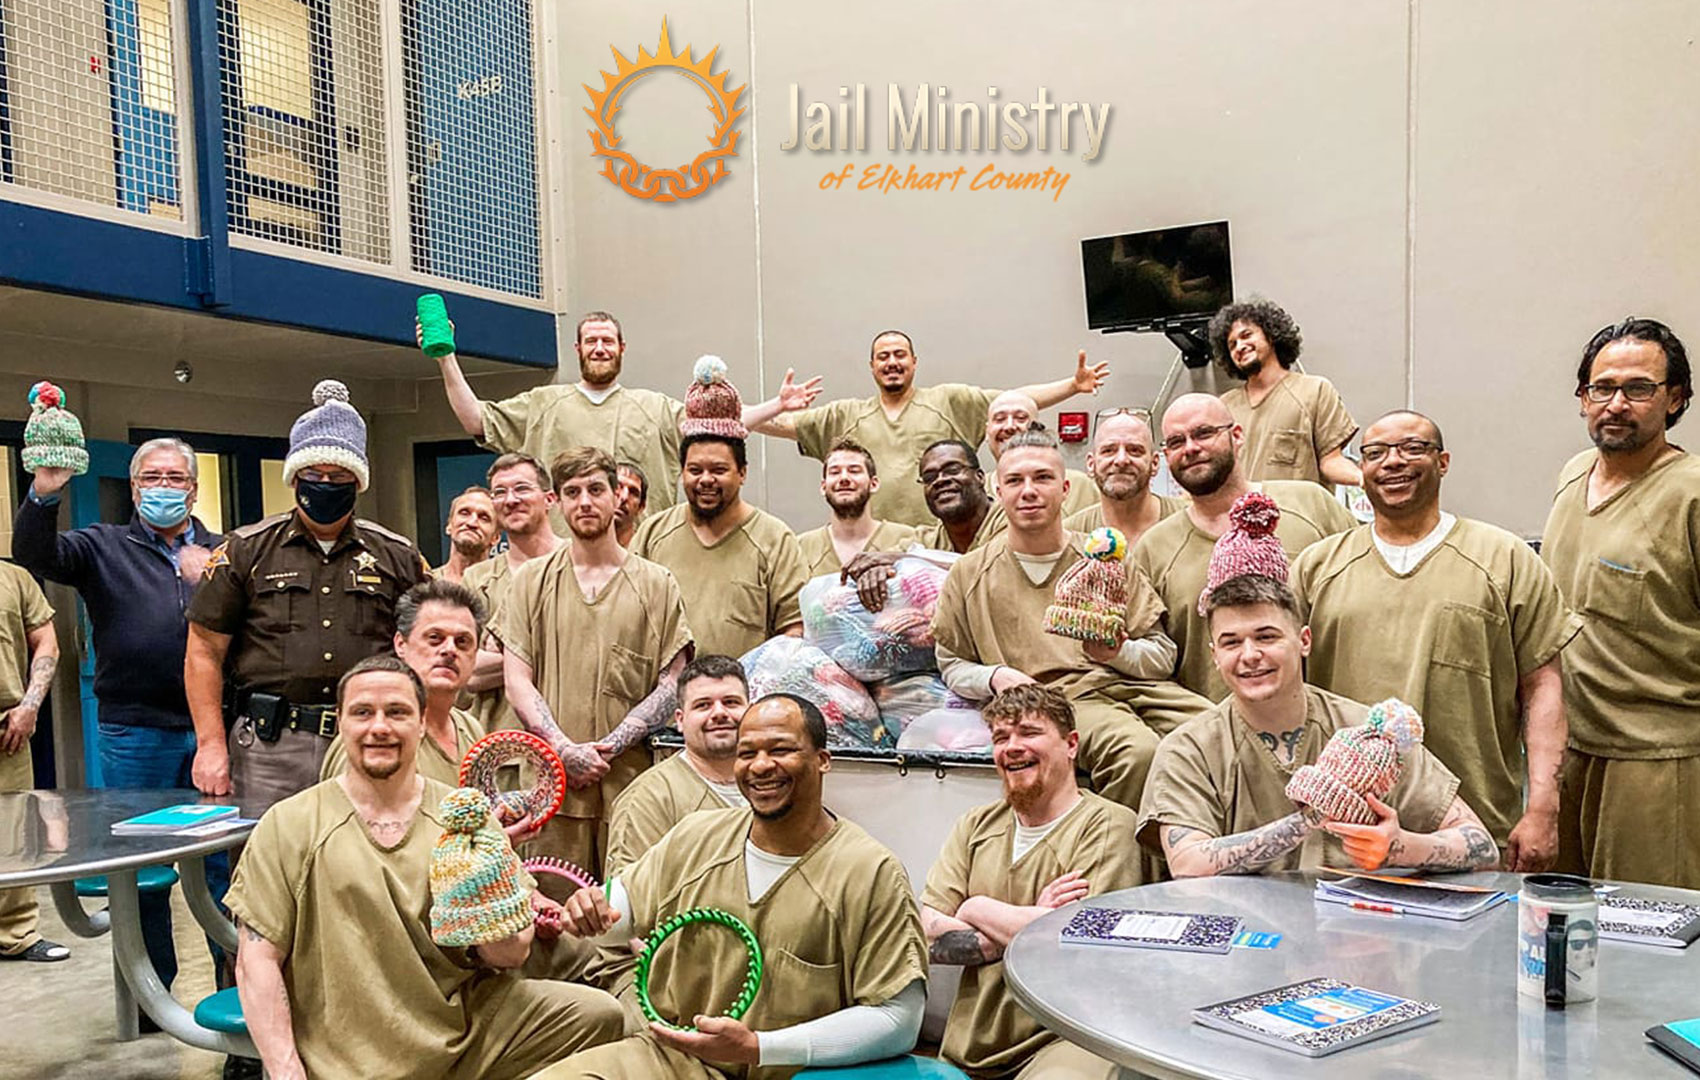 Jail Ministry of Elkhart County